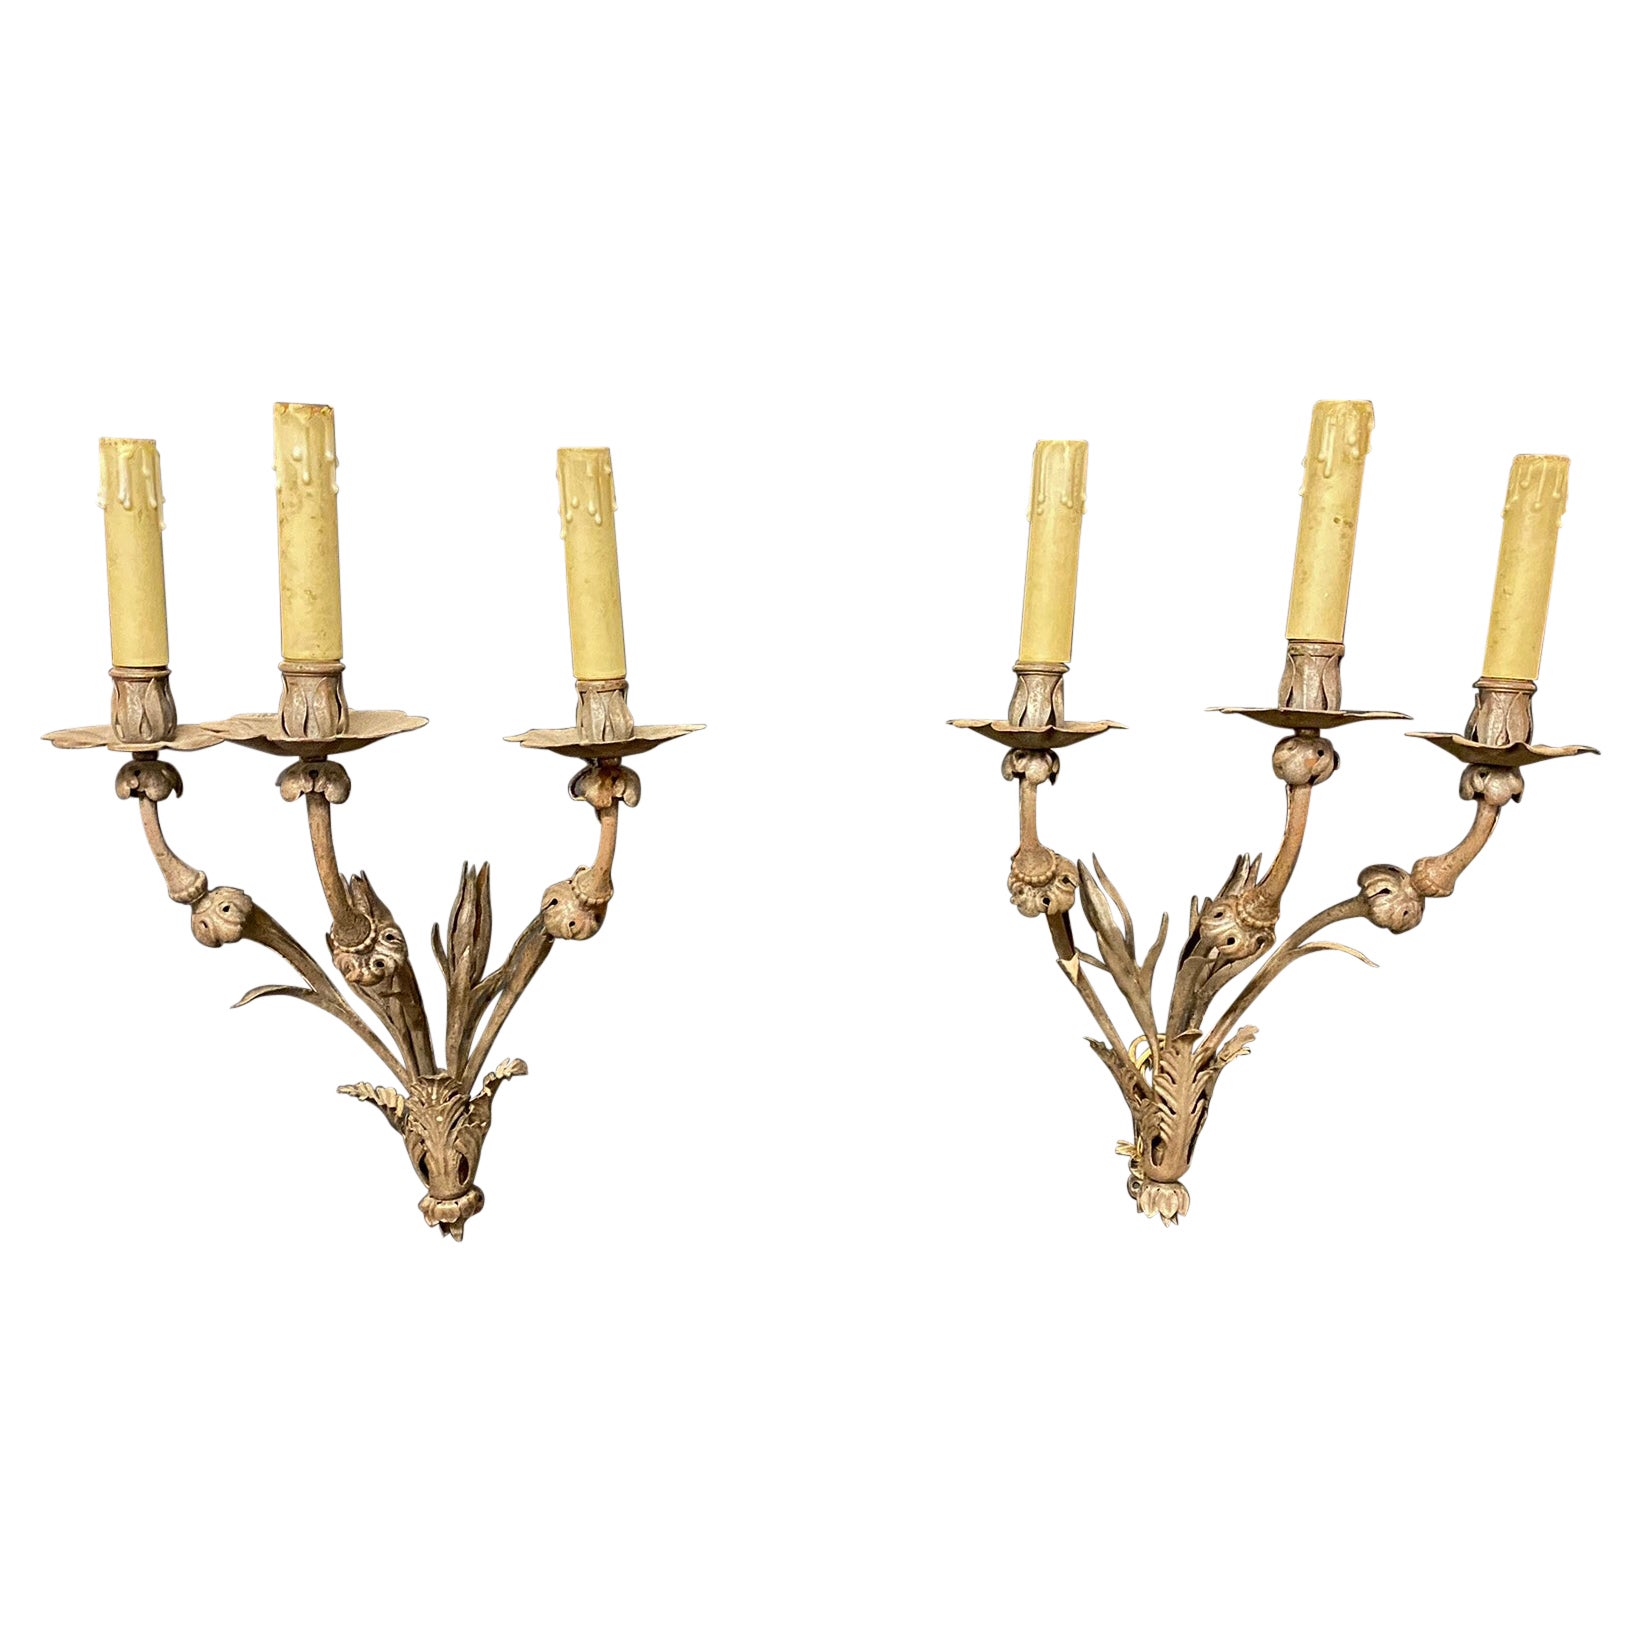 Elegant Wrought Iron Sconces from a Chateau in Central France, circa 1940/1950 For Sale